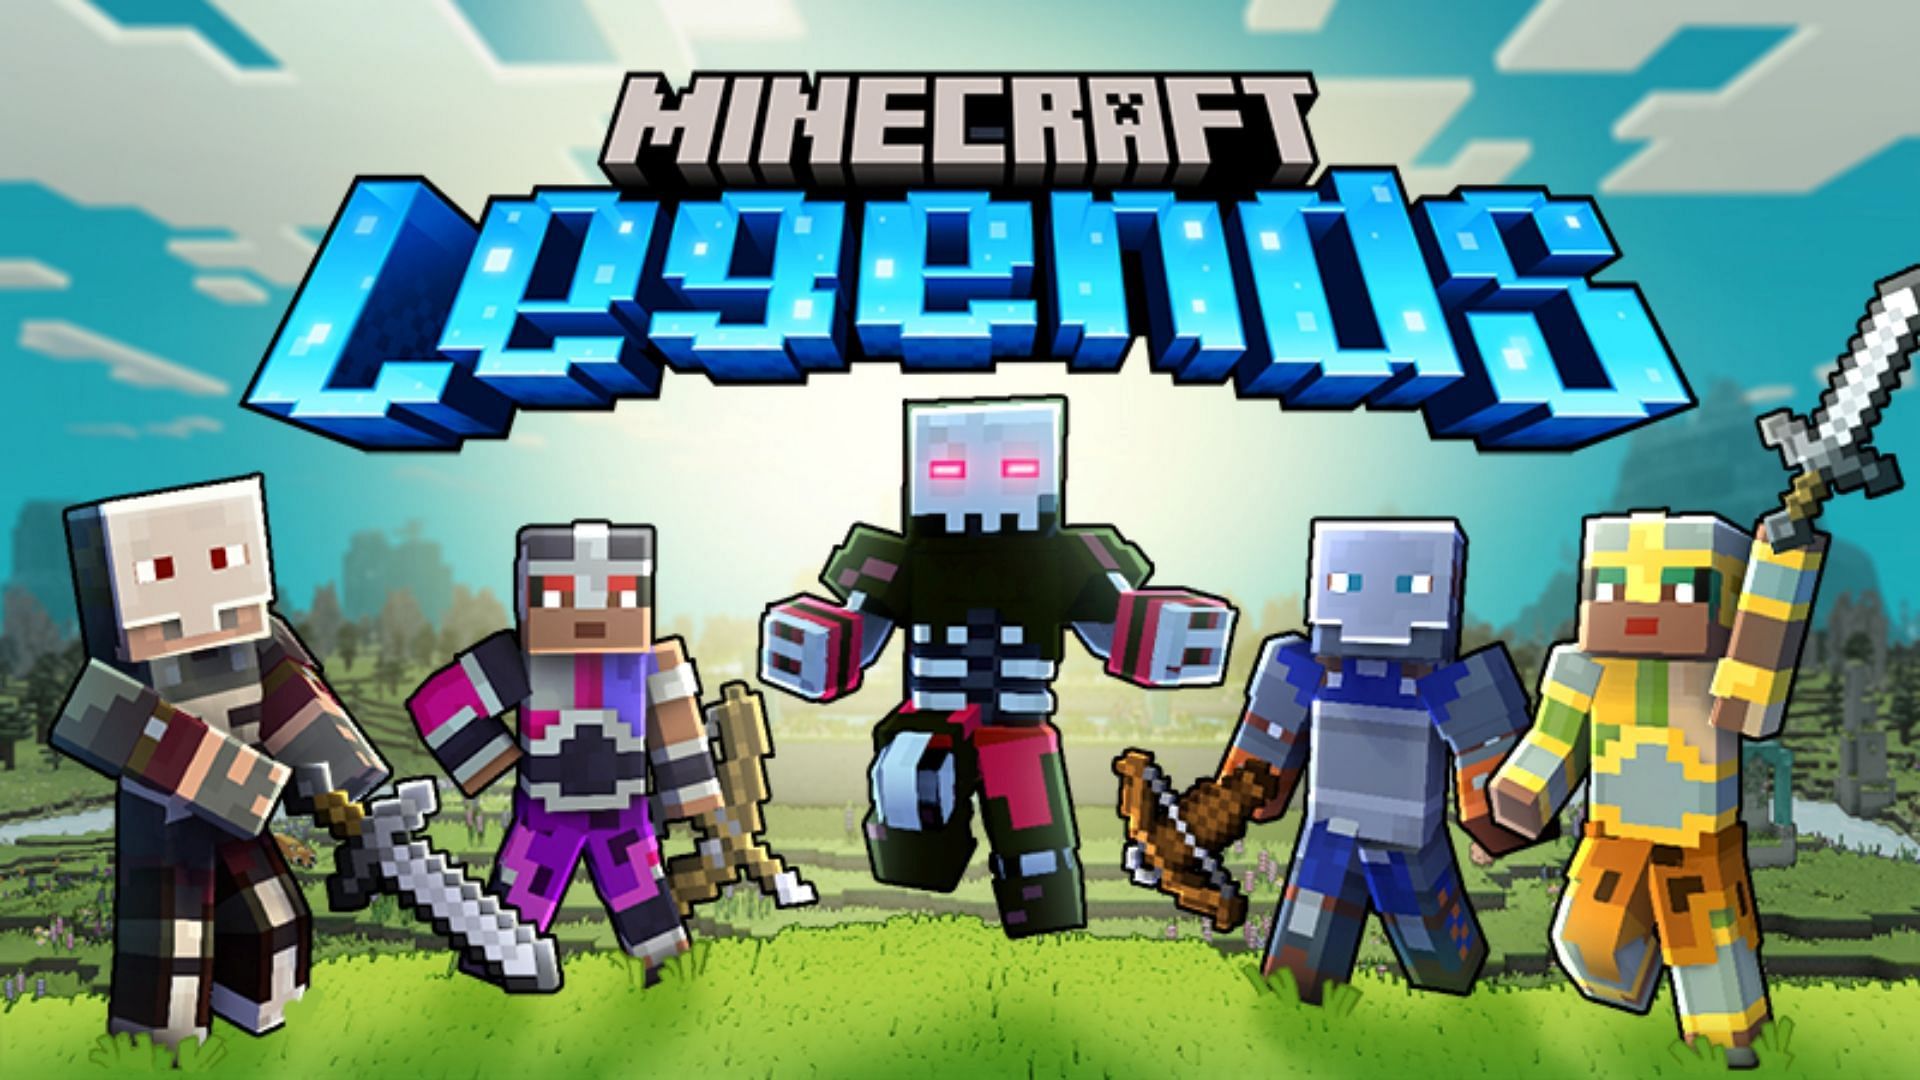 Minecraft Legends is another famous action-strategy game from Mojang, whose skins can be bought in Bedrock Edition. (Image via Mojang)